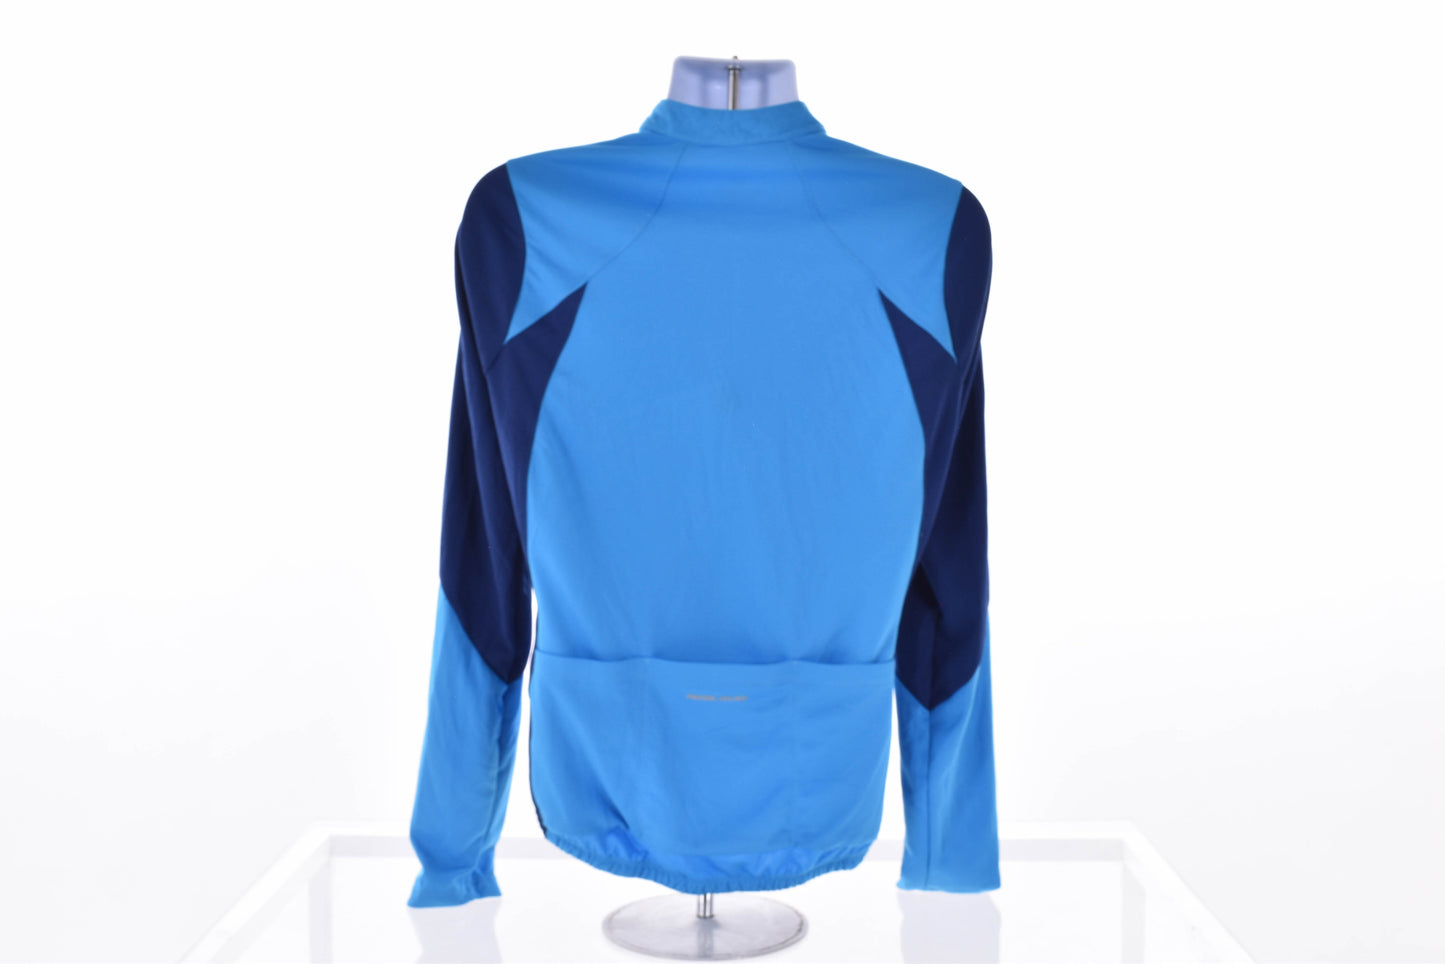 USED Pearl Izumi Large Jersey and Jacket Value Pack Set All Weather